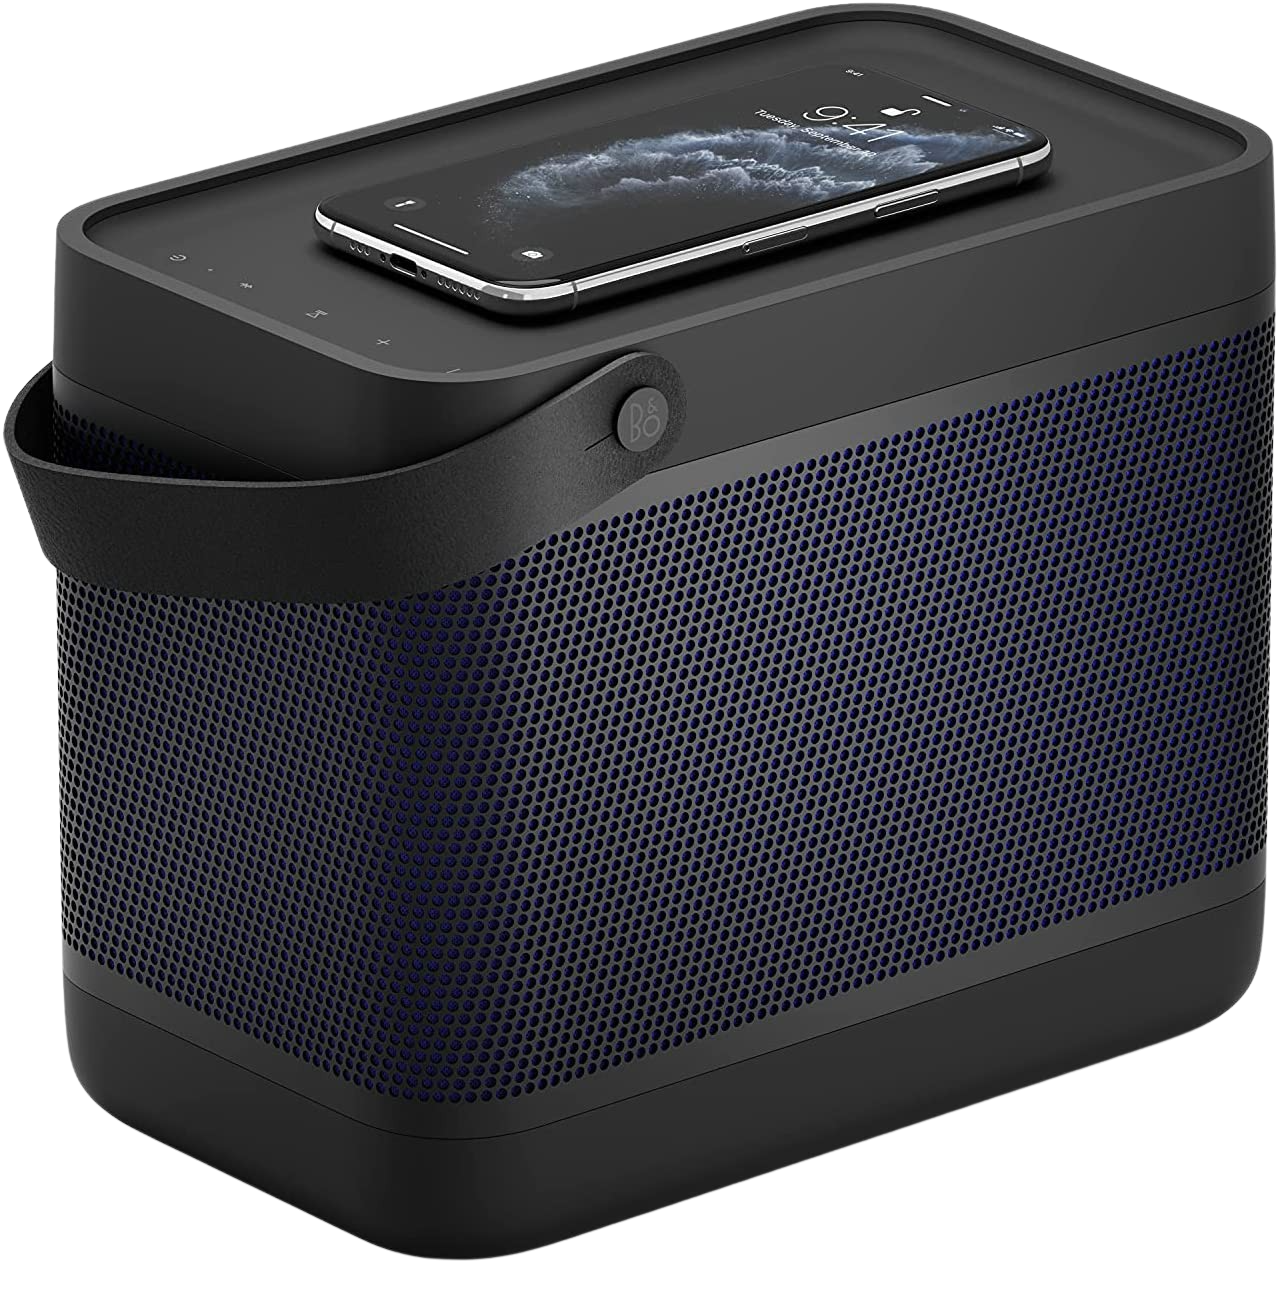 Rent Bang & Olufsen Beolit 20 Portable Bluetooth Speaker from